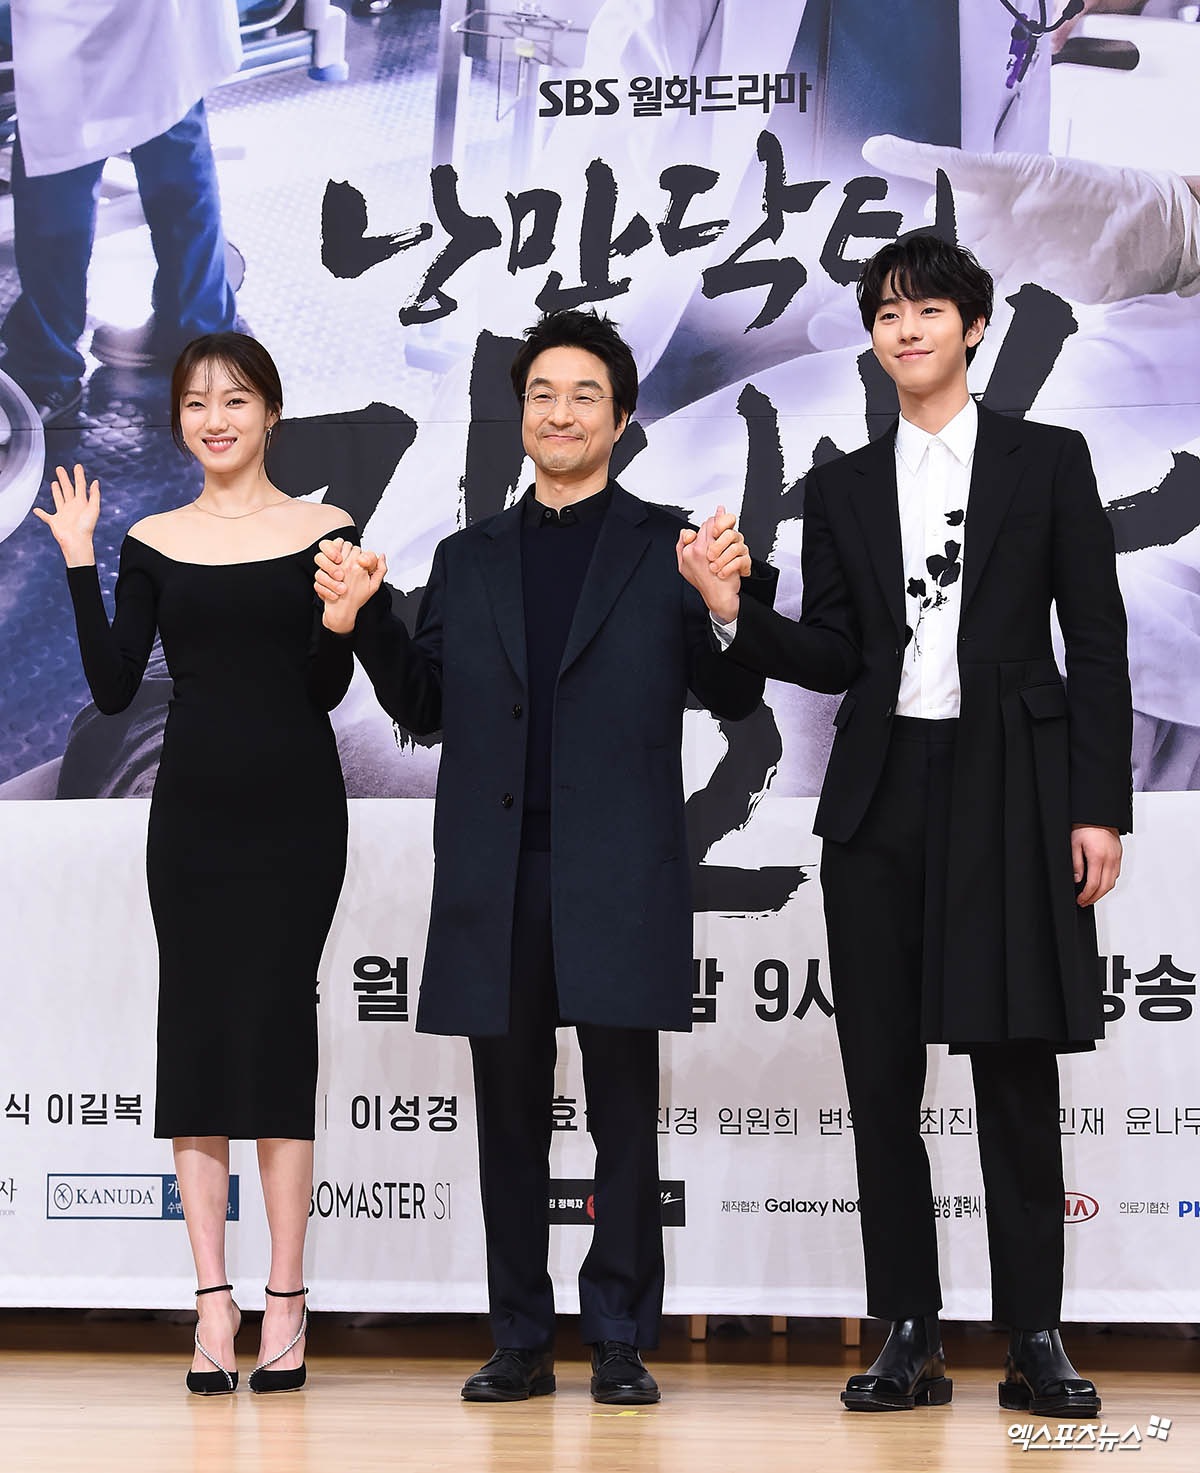 Actor Lee Sung-kyung, who attended the SBS new Mon-Tue drama Romantic Doctor Kim Sabu Season 2 production presentation at SBS in Mok-dong, Seoul on the afternoon of the 6th, has photo time.A cool shoulder line.The sidelines like paper.Romantic Doctor Season 2 Joins Kim Sa-bu as a disciple.Slim body lineBrown Eyes of Enchantment.Re-challenging Doctors Acting After DoctorsKim Sa-bu Gets New Student.